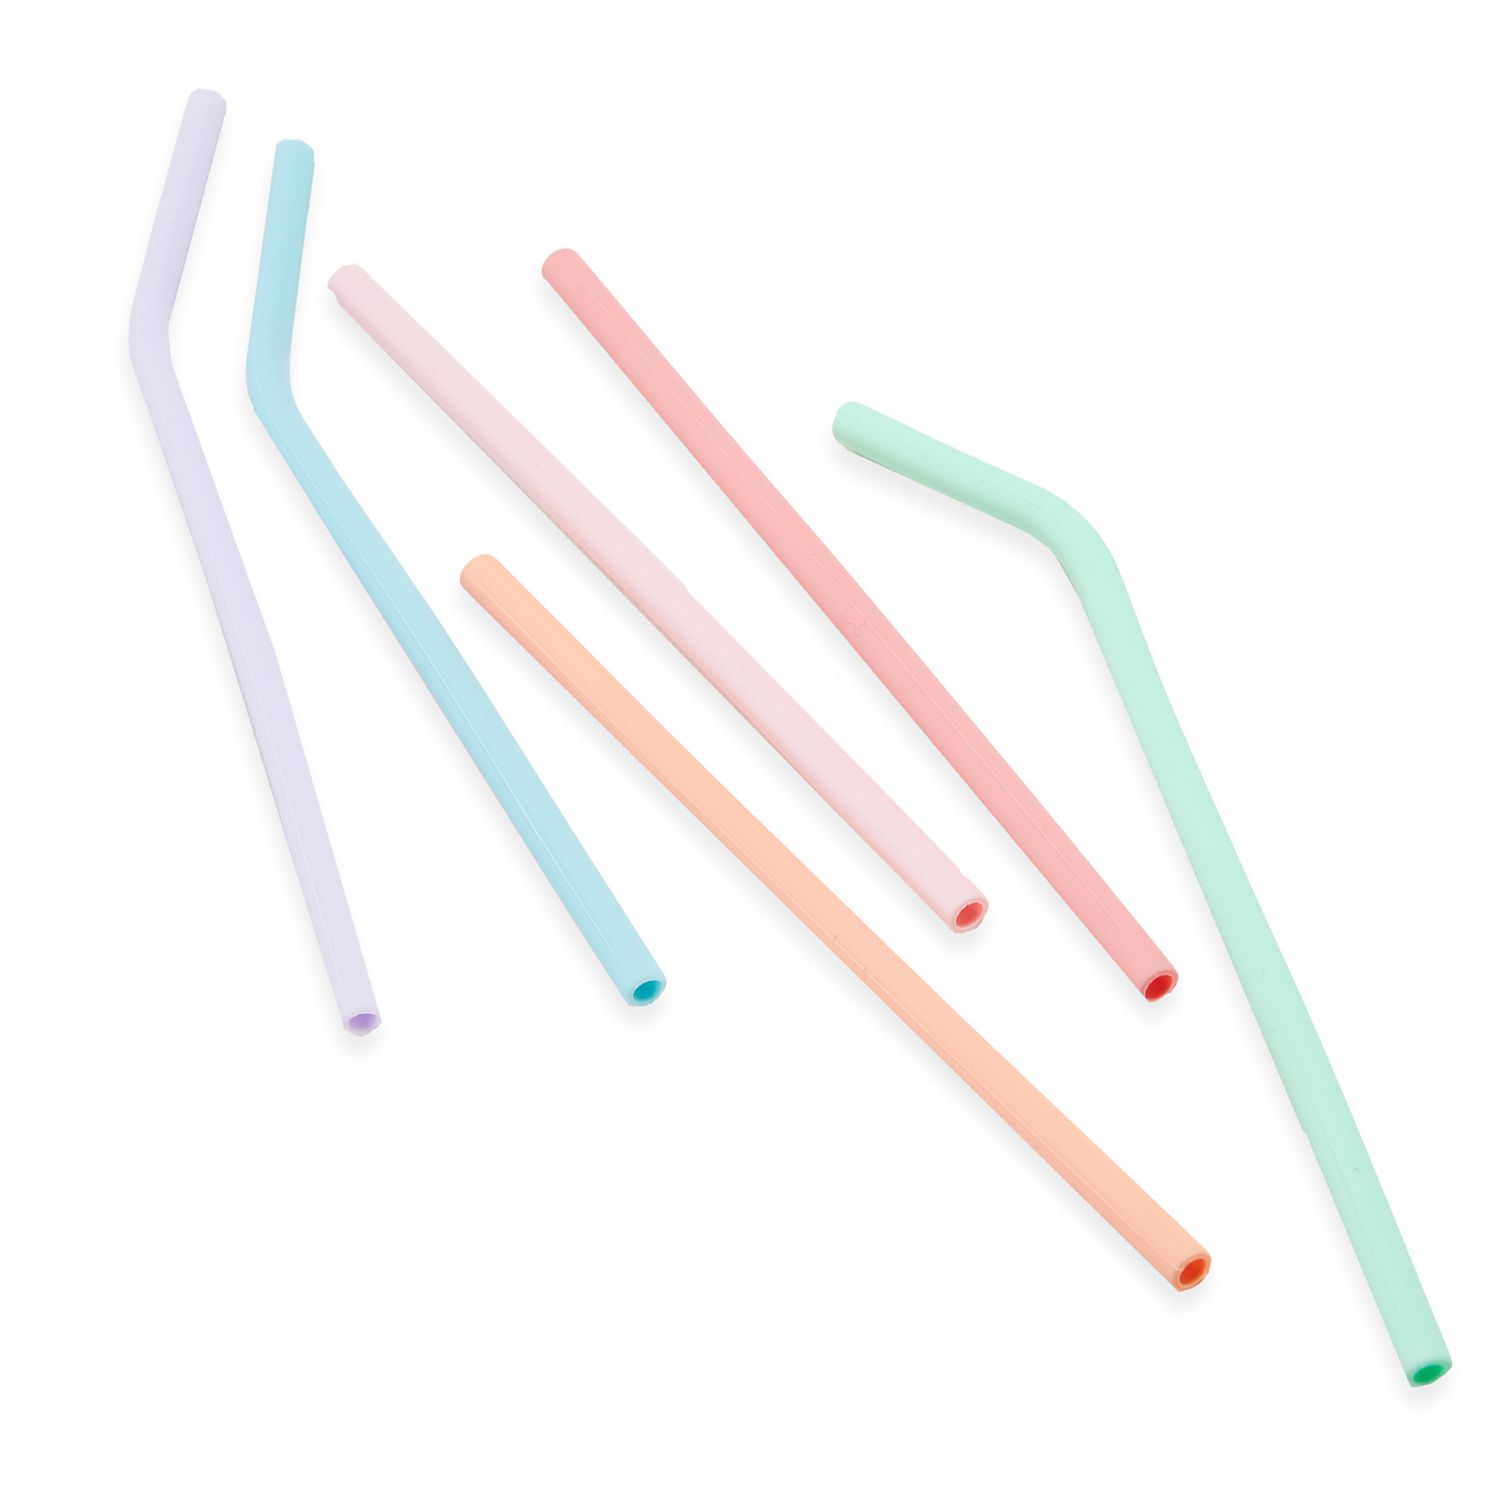 Cheap Christmas Gifts Under $25: silicone straws